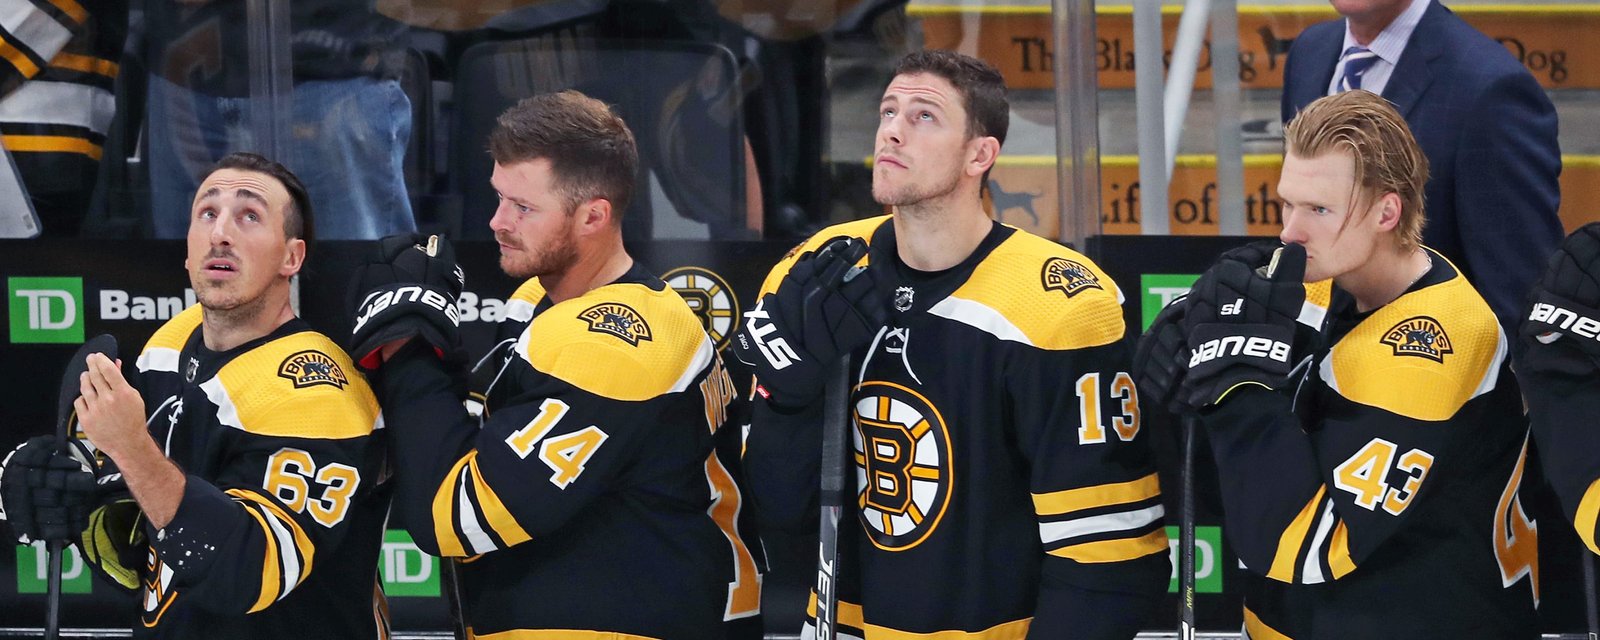 3 Bruins players admit to bad anxiety and mental health issues 